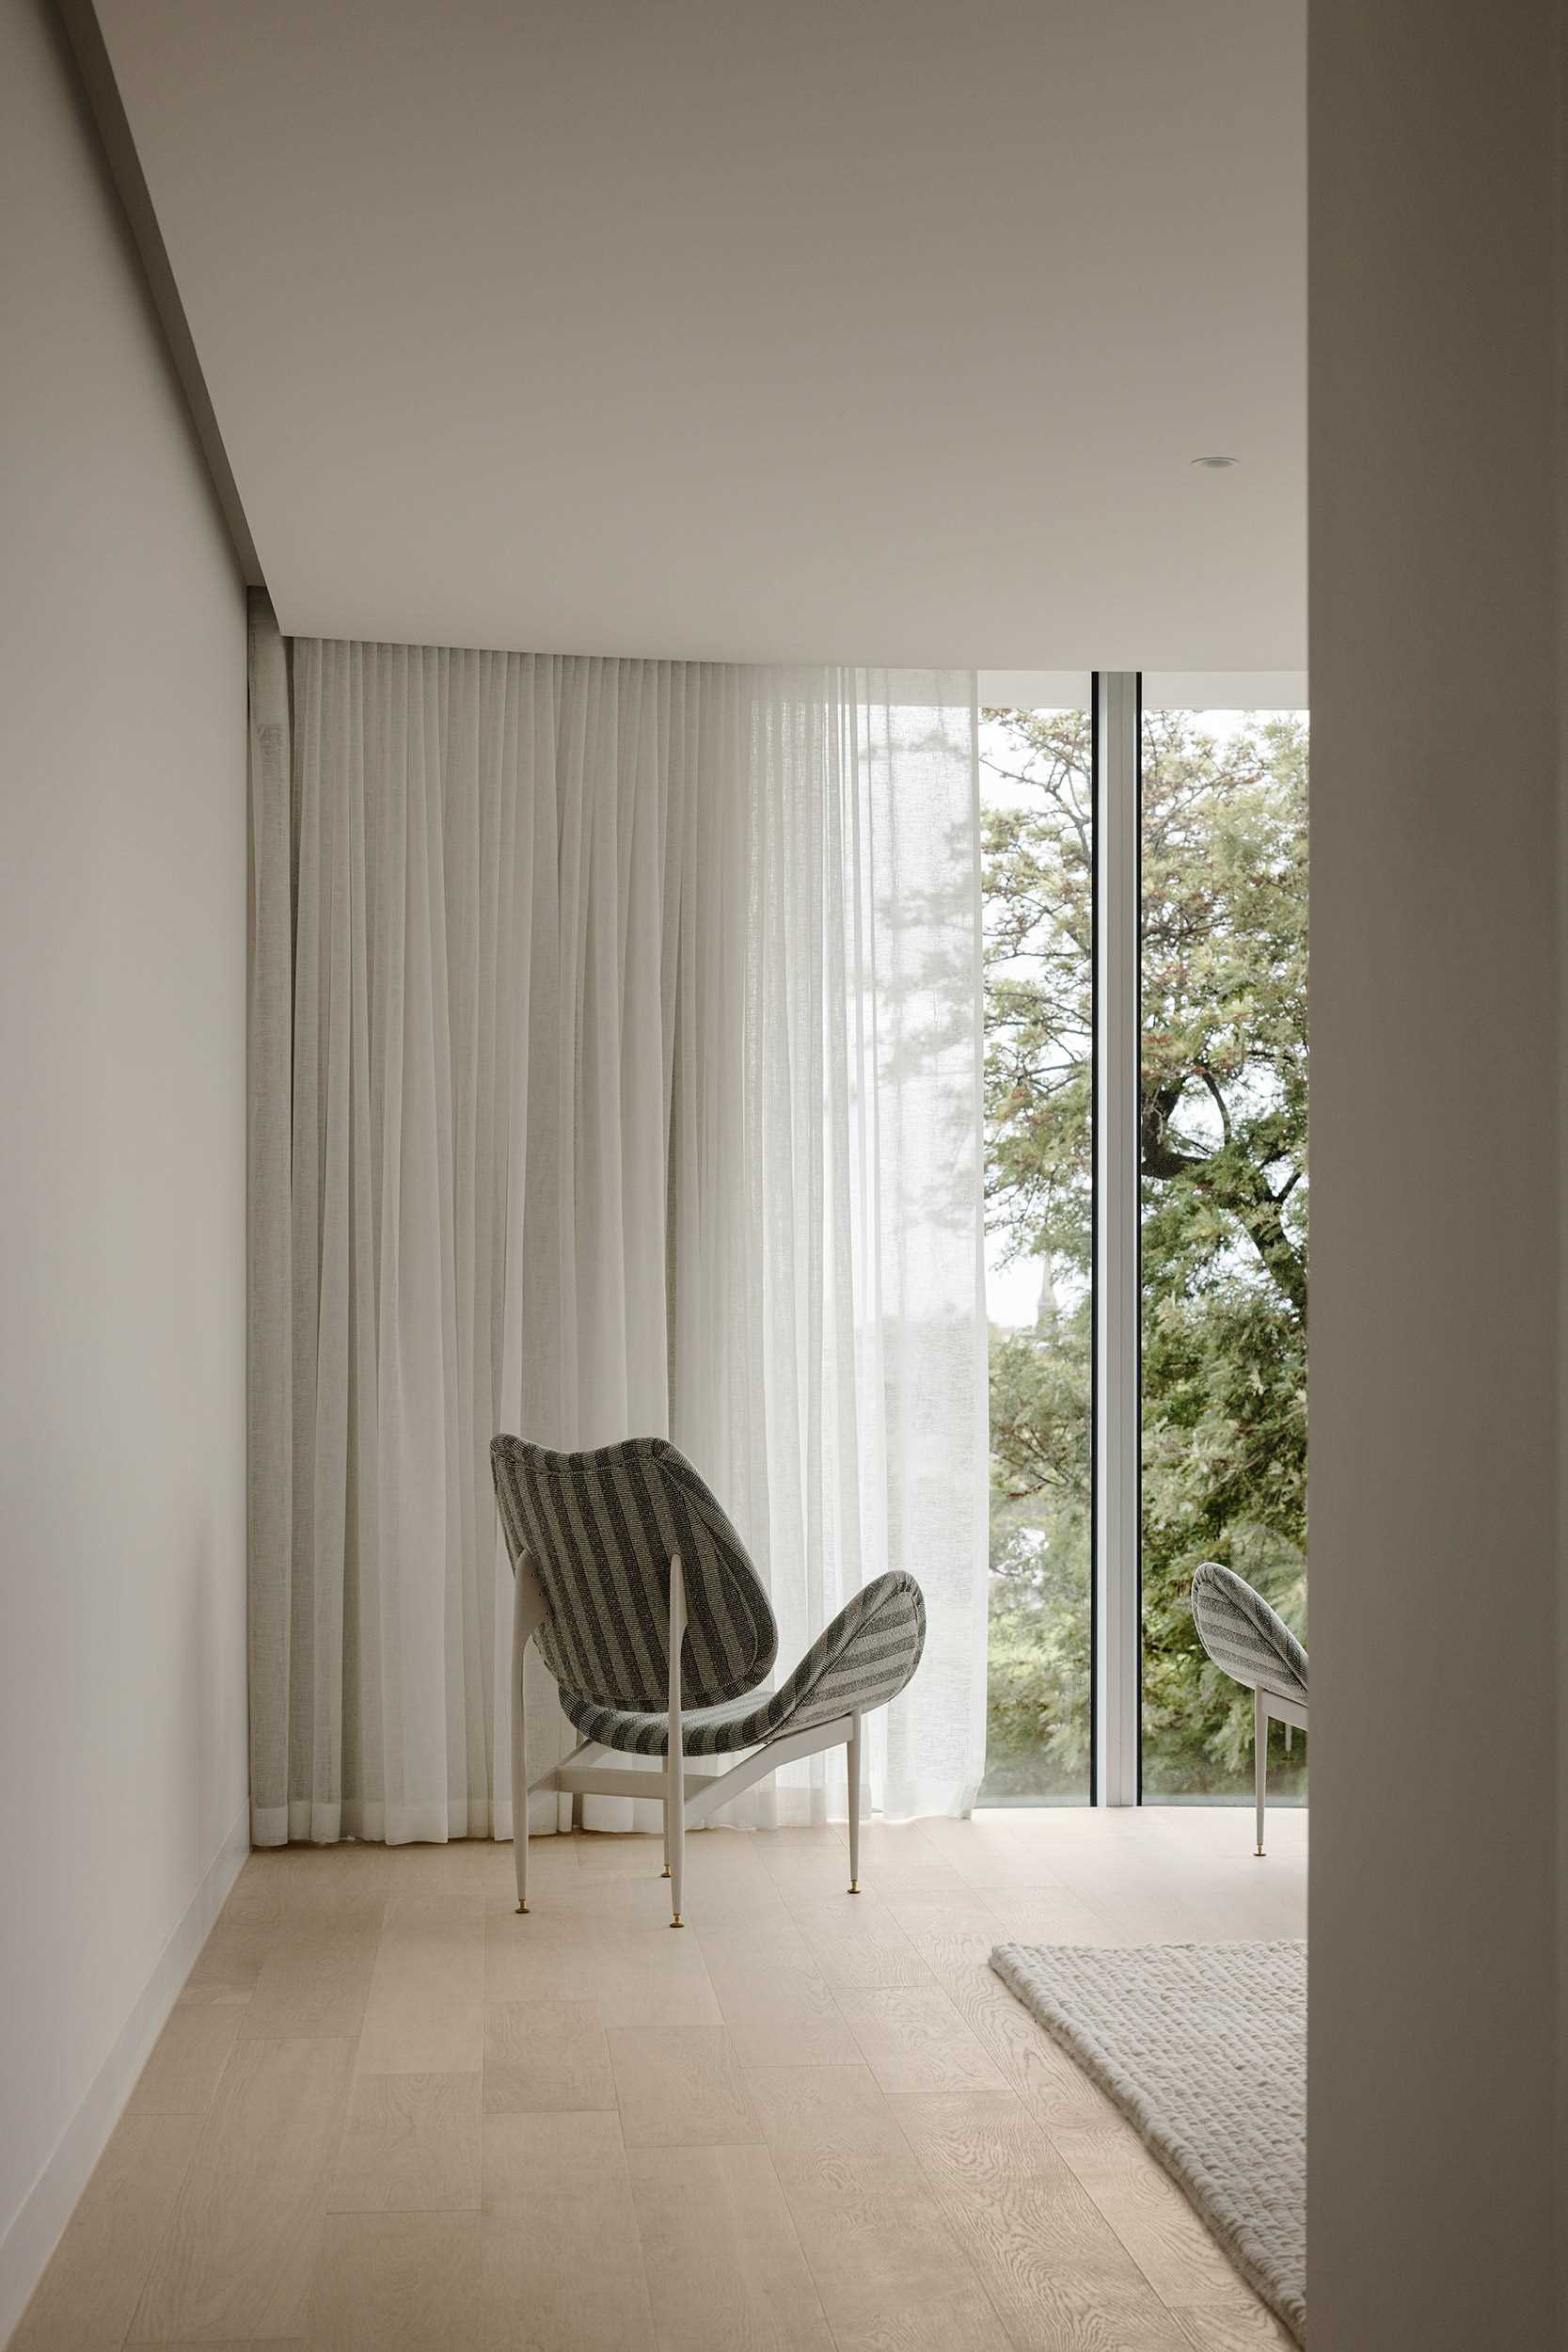 In this modern bedroom, soft and lightweight curtains add a delicate touch, creating a luxurious and relaxing atmosphere.